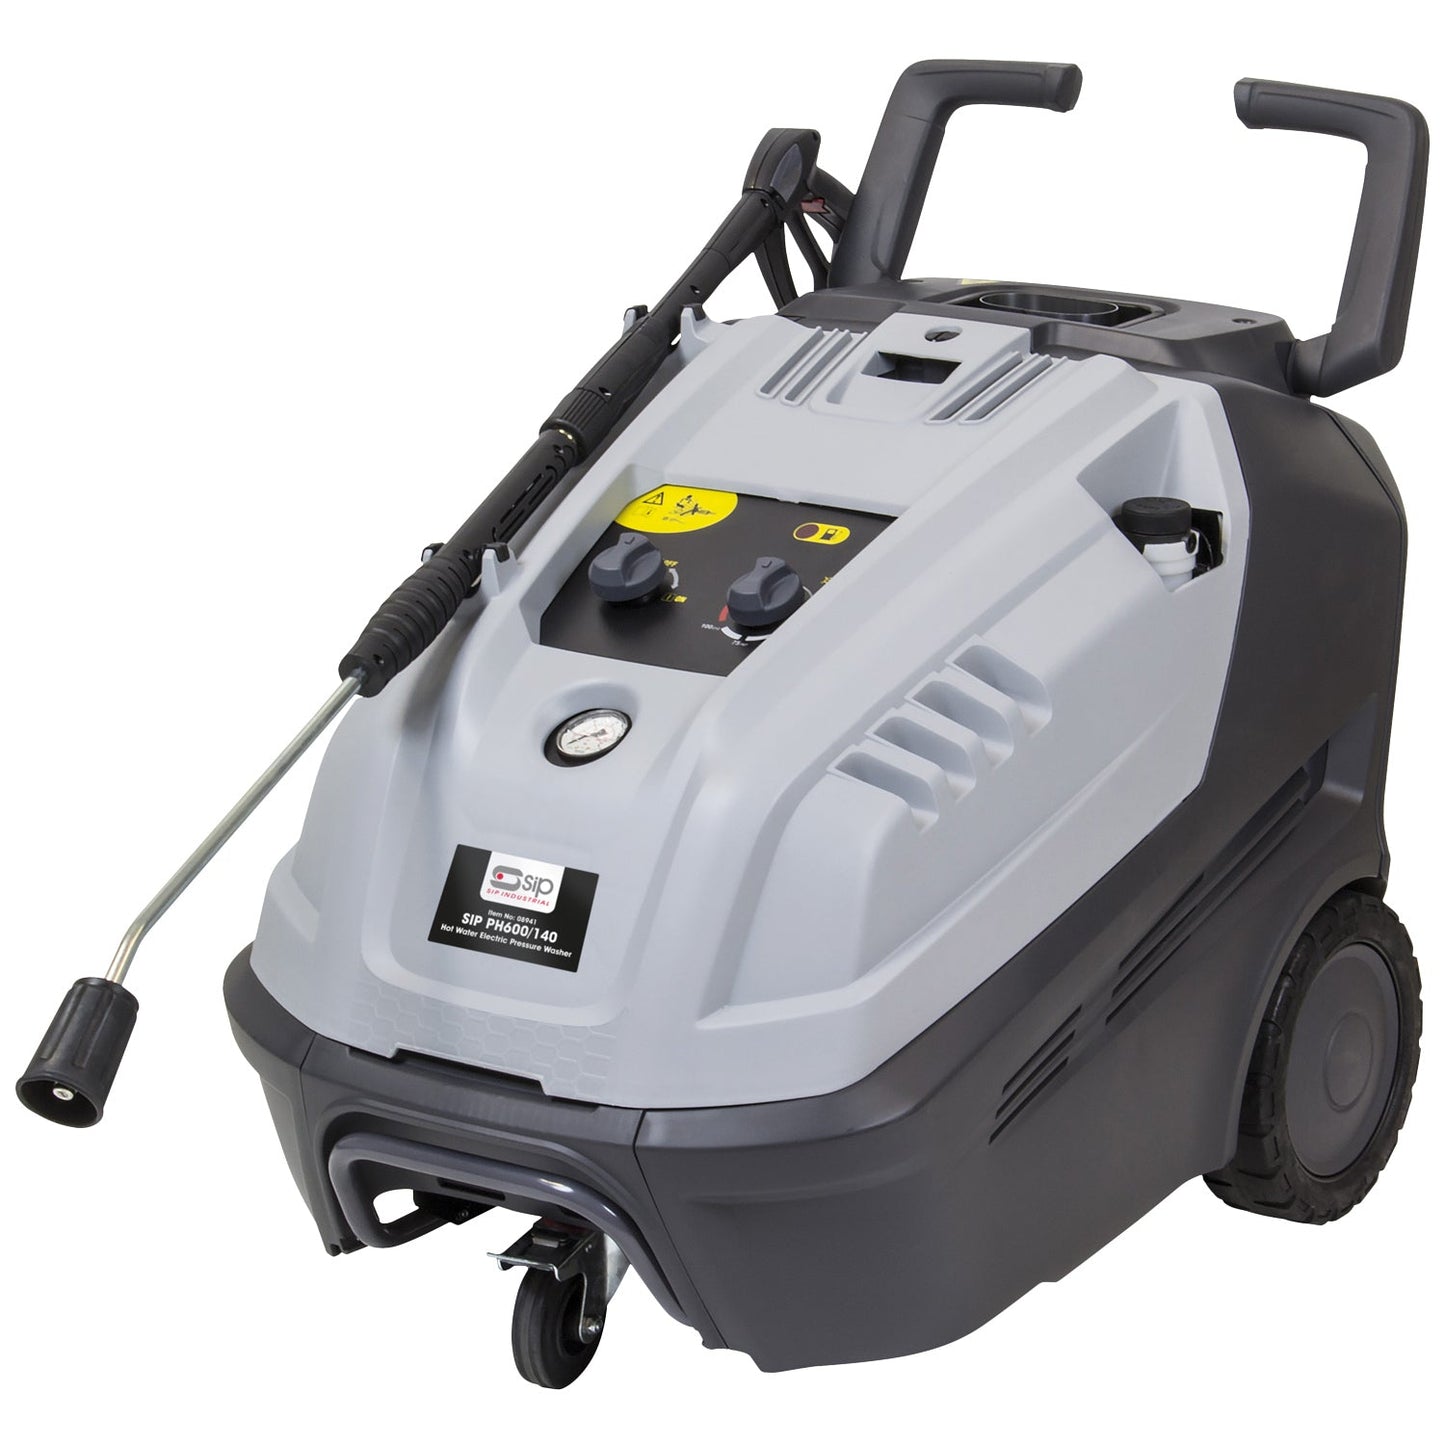 SIP TEMPEST PH600/140 A2 Hot Water Electric Pressure Washer, Sip Industrial